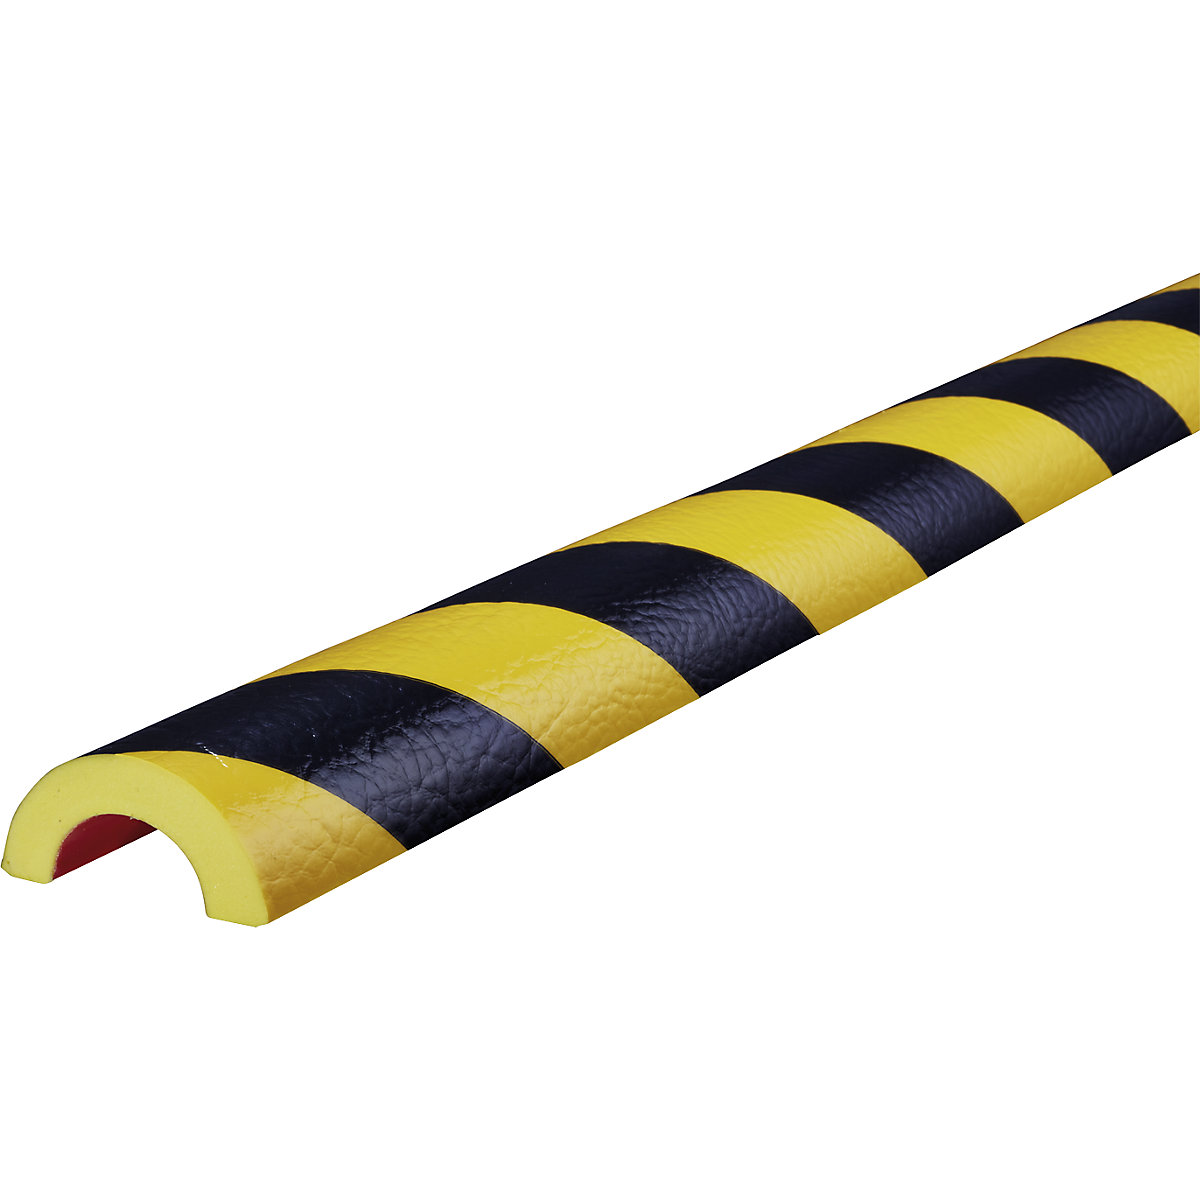 Knuffi® pipe protection - SHG